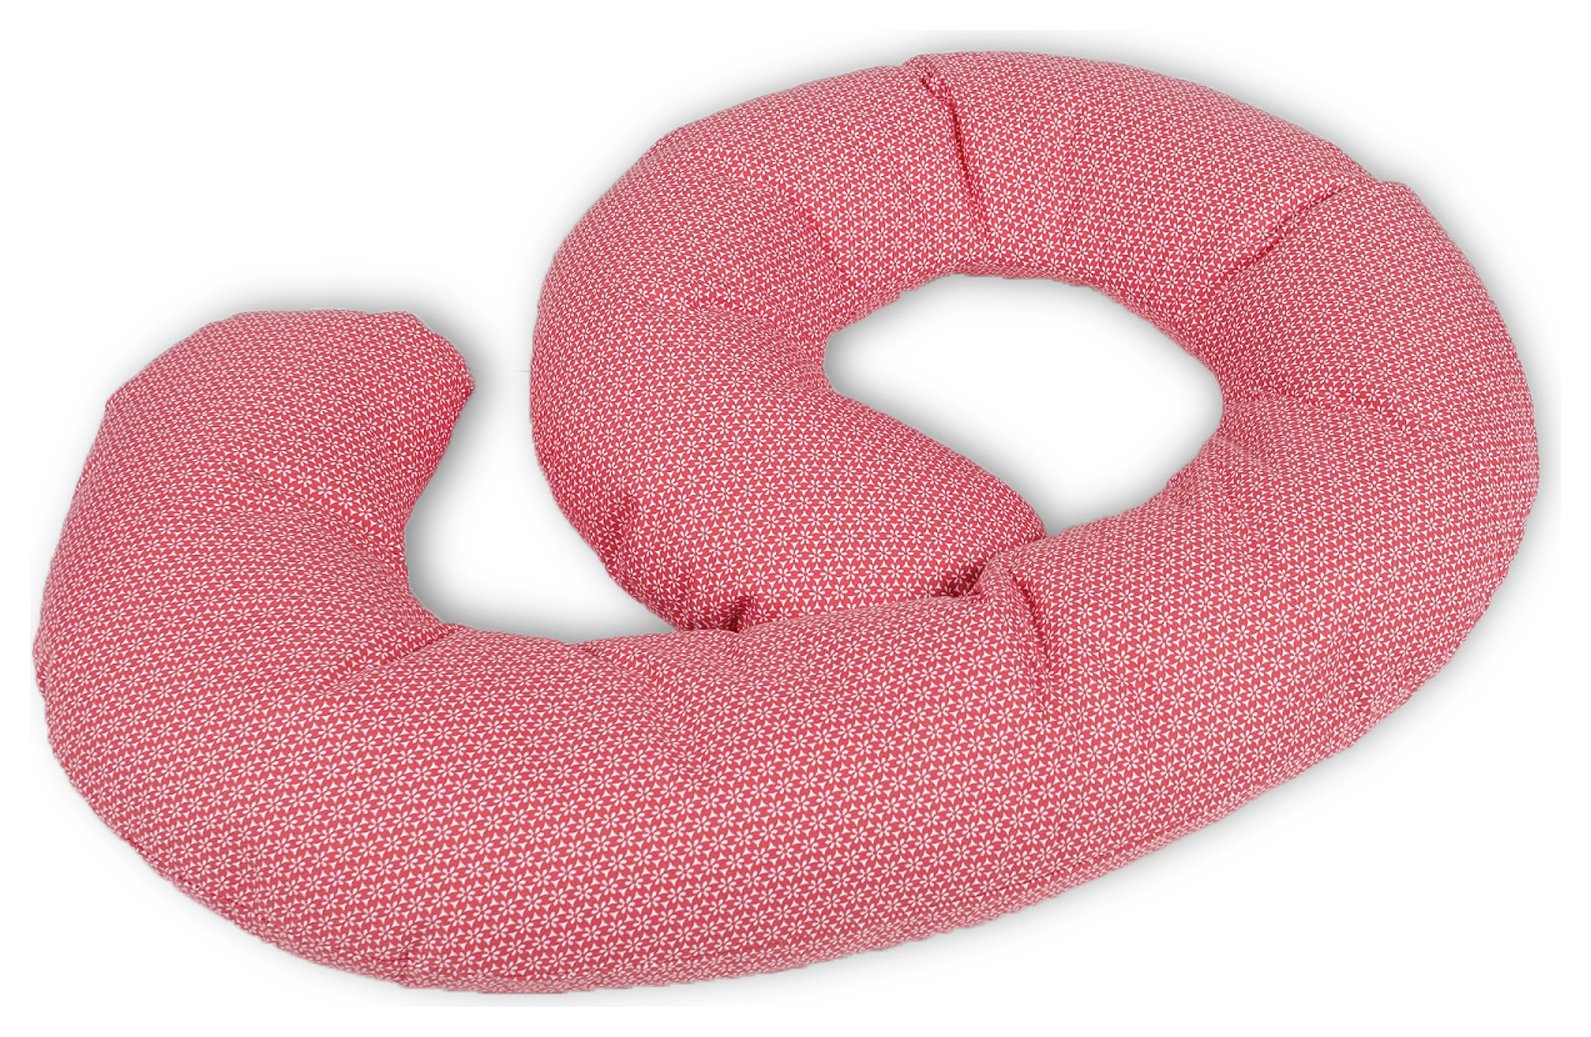 Kit for Kids Cuddle Me Pregnancy Pillow - Red Flower